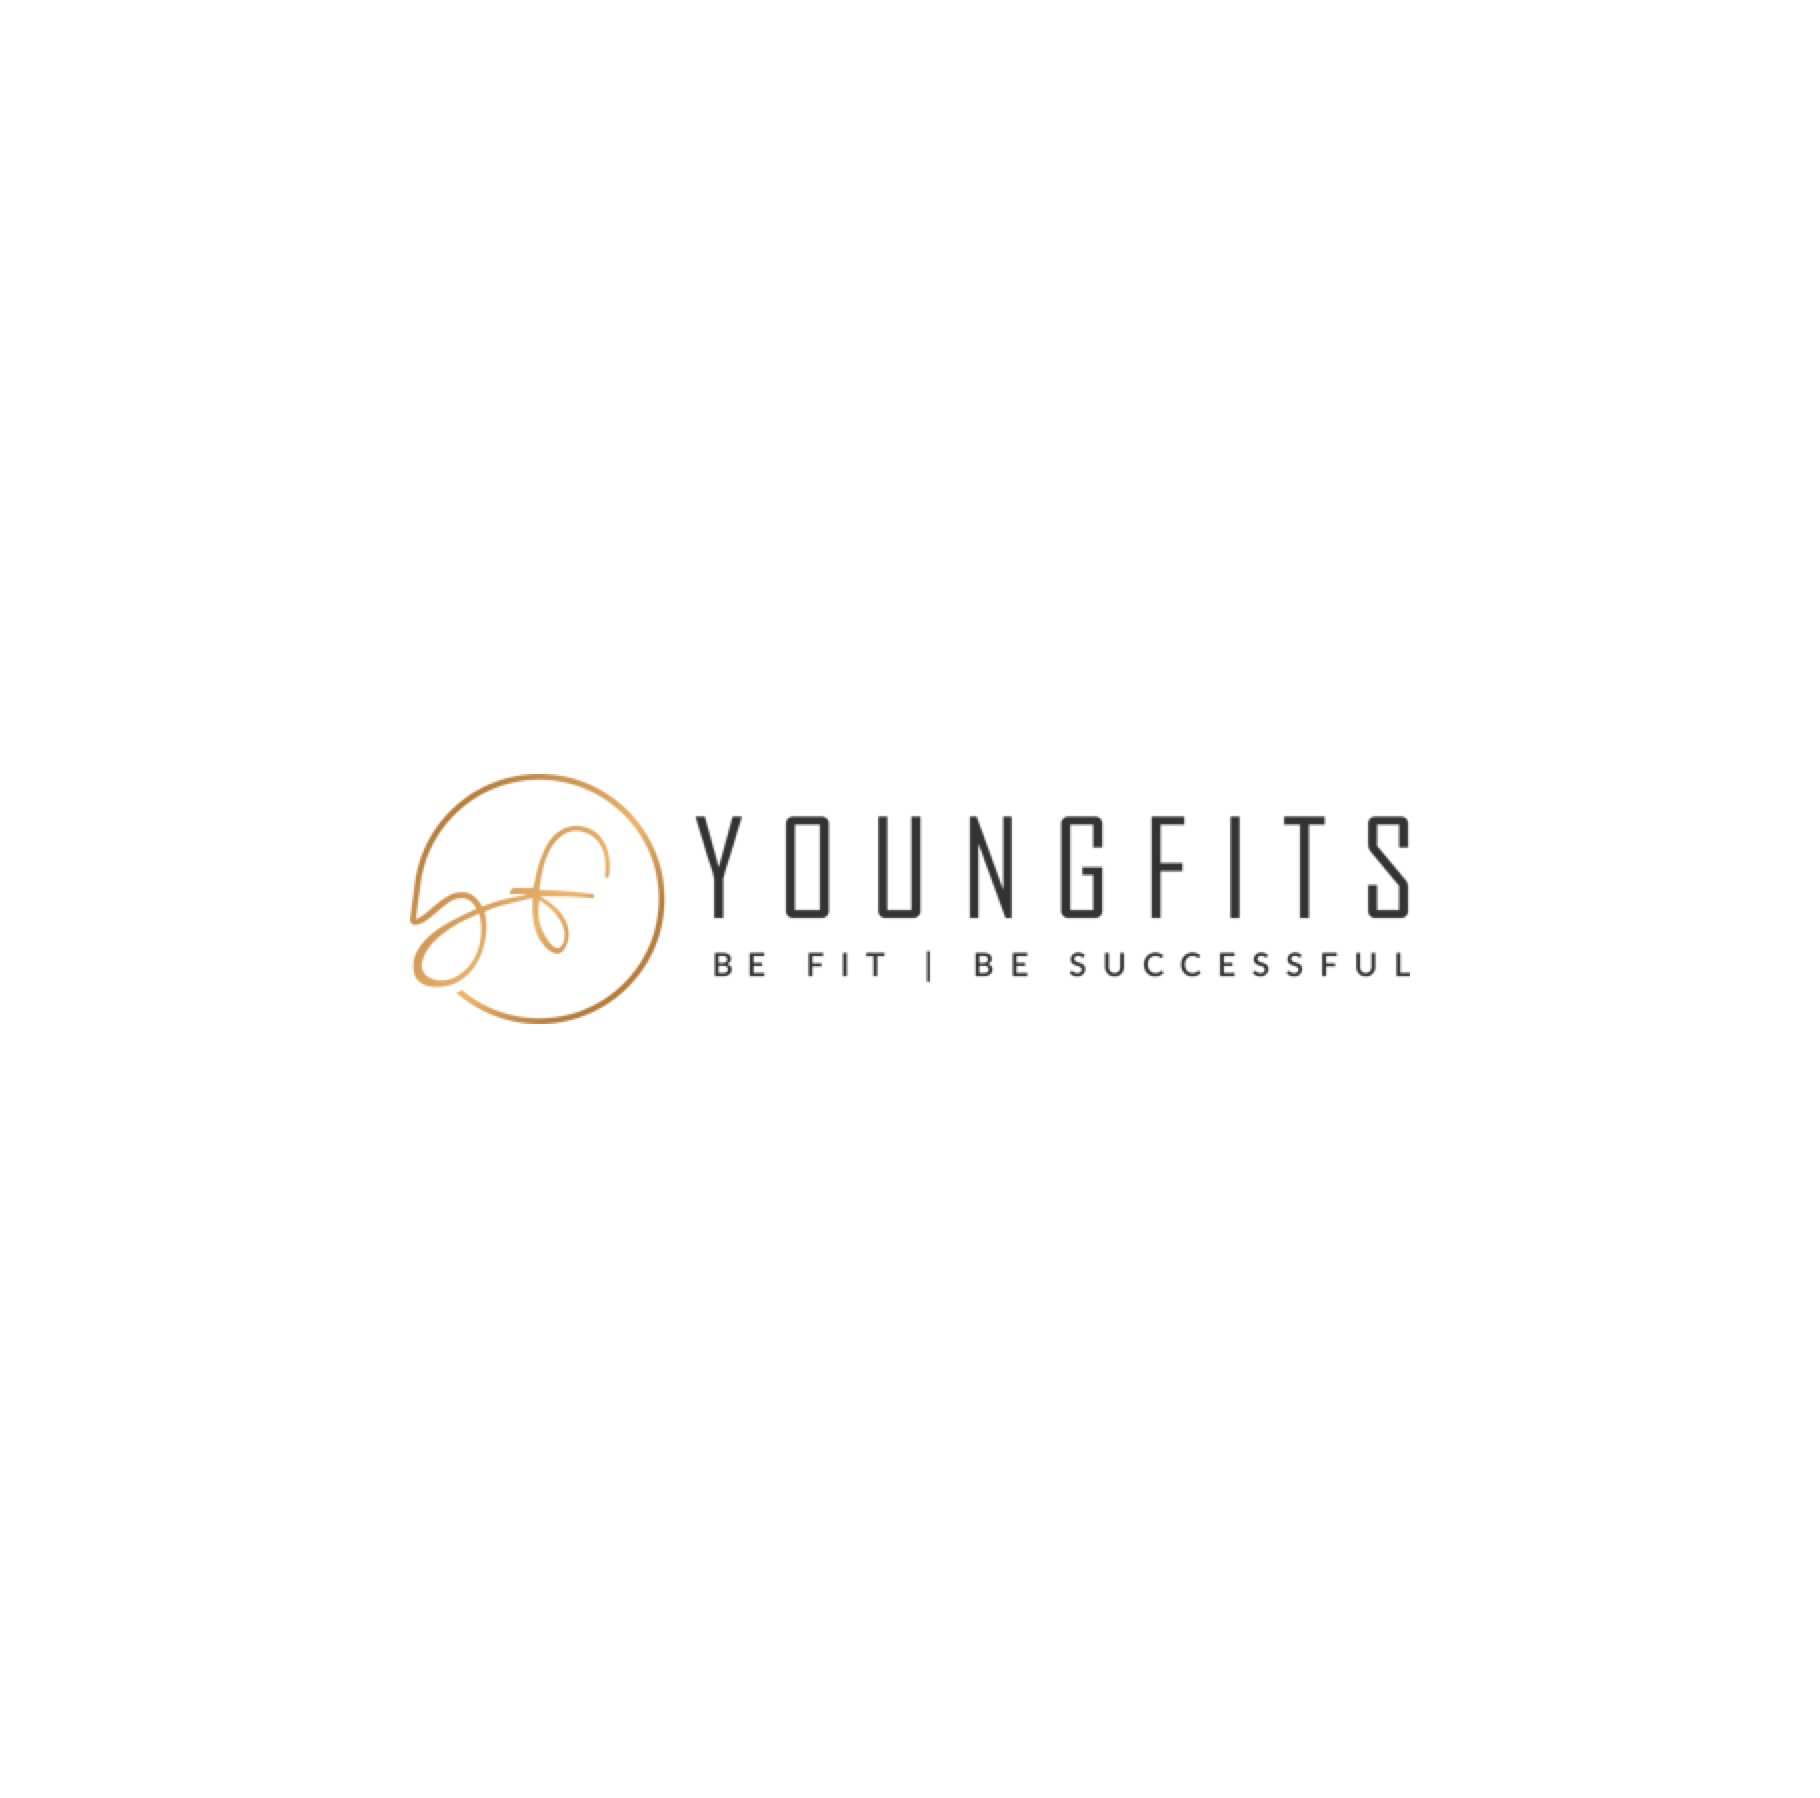 YOUNGFITS: BE FIT | BE SUCCESSFUL